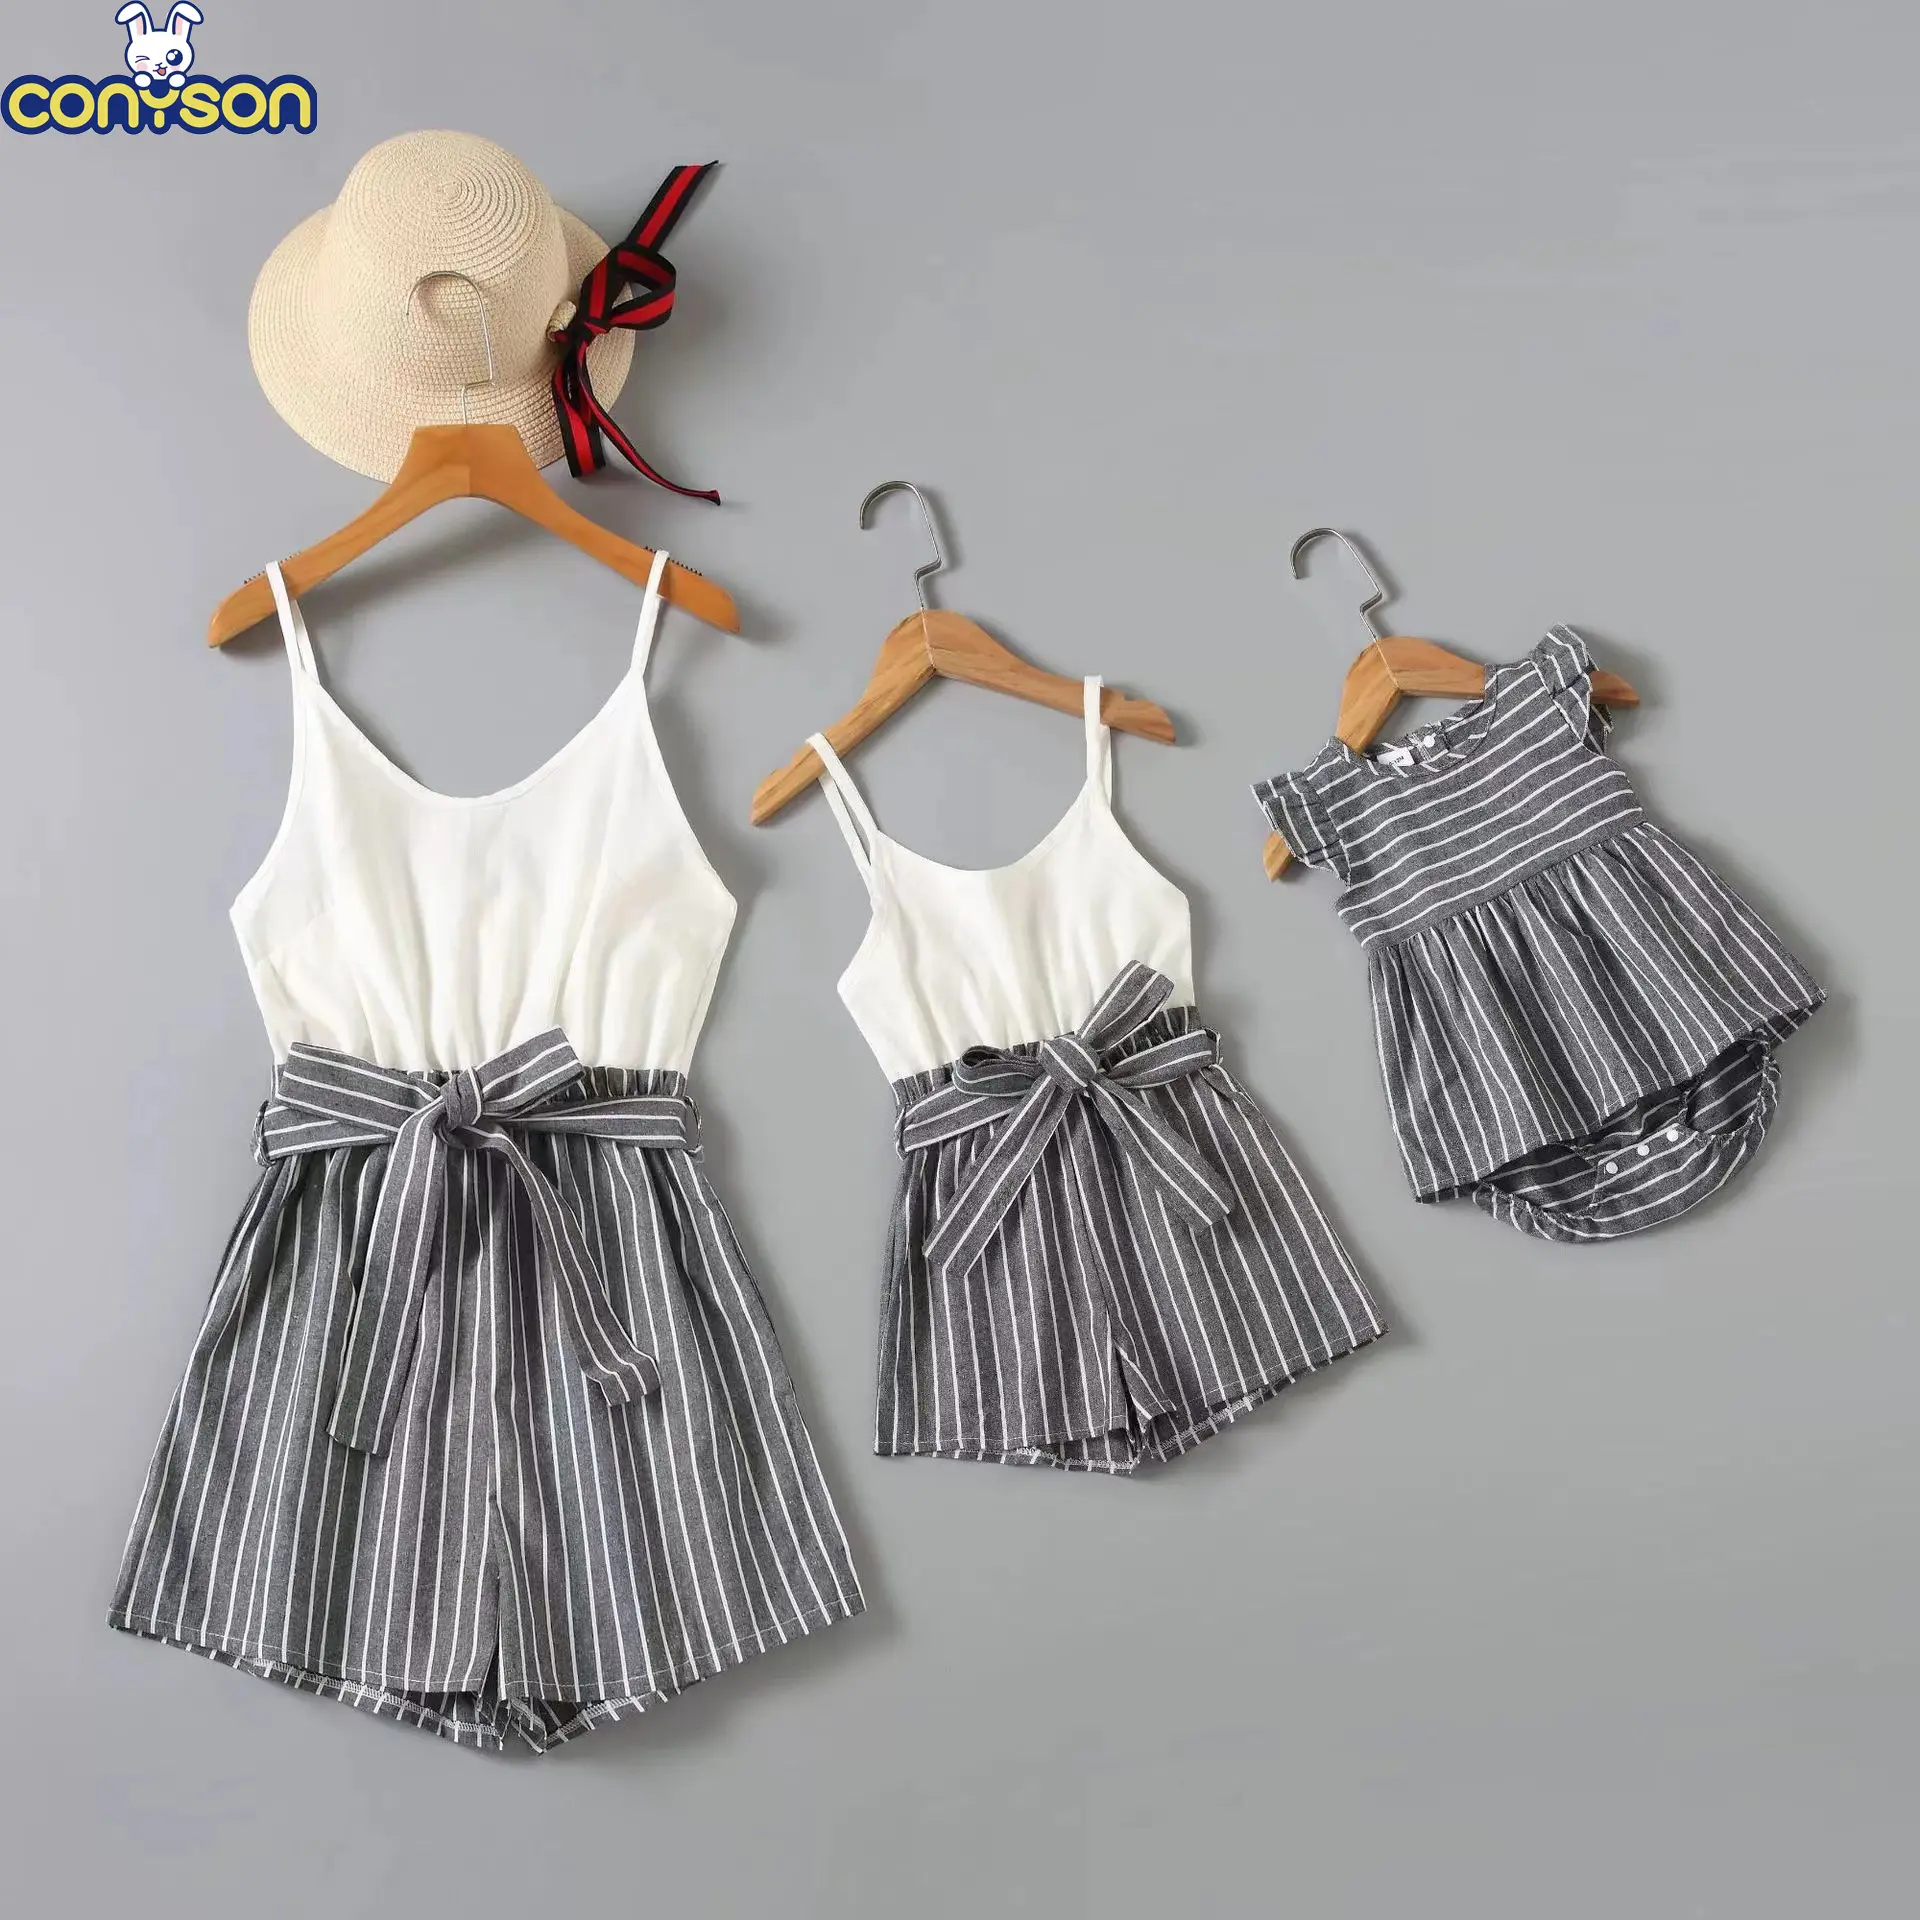 Conyson Wholesale Spring Summer Knitting Polyester Parent Child Clothing High Quality Organic Family Matching White Clothes